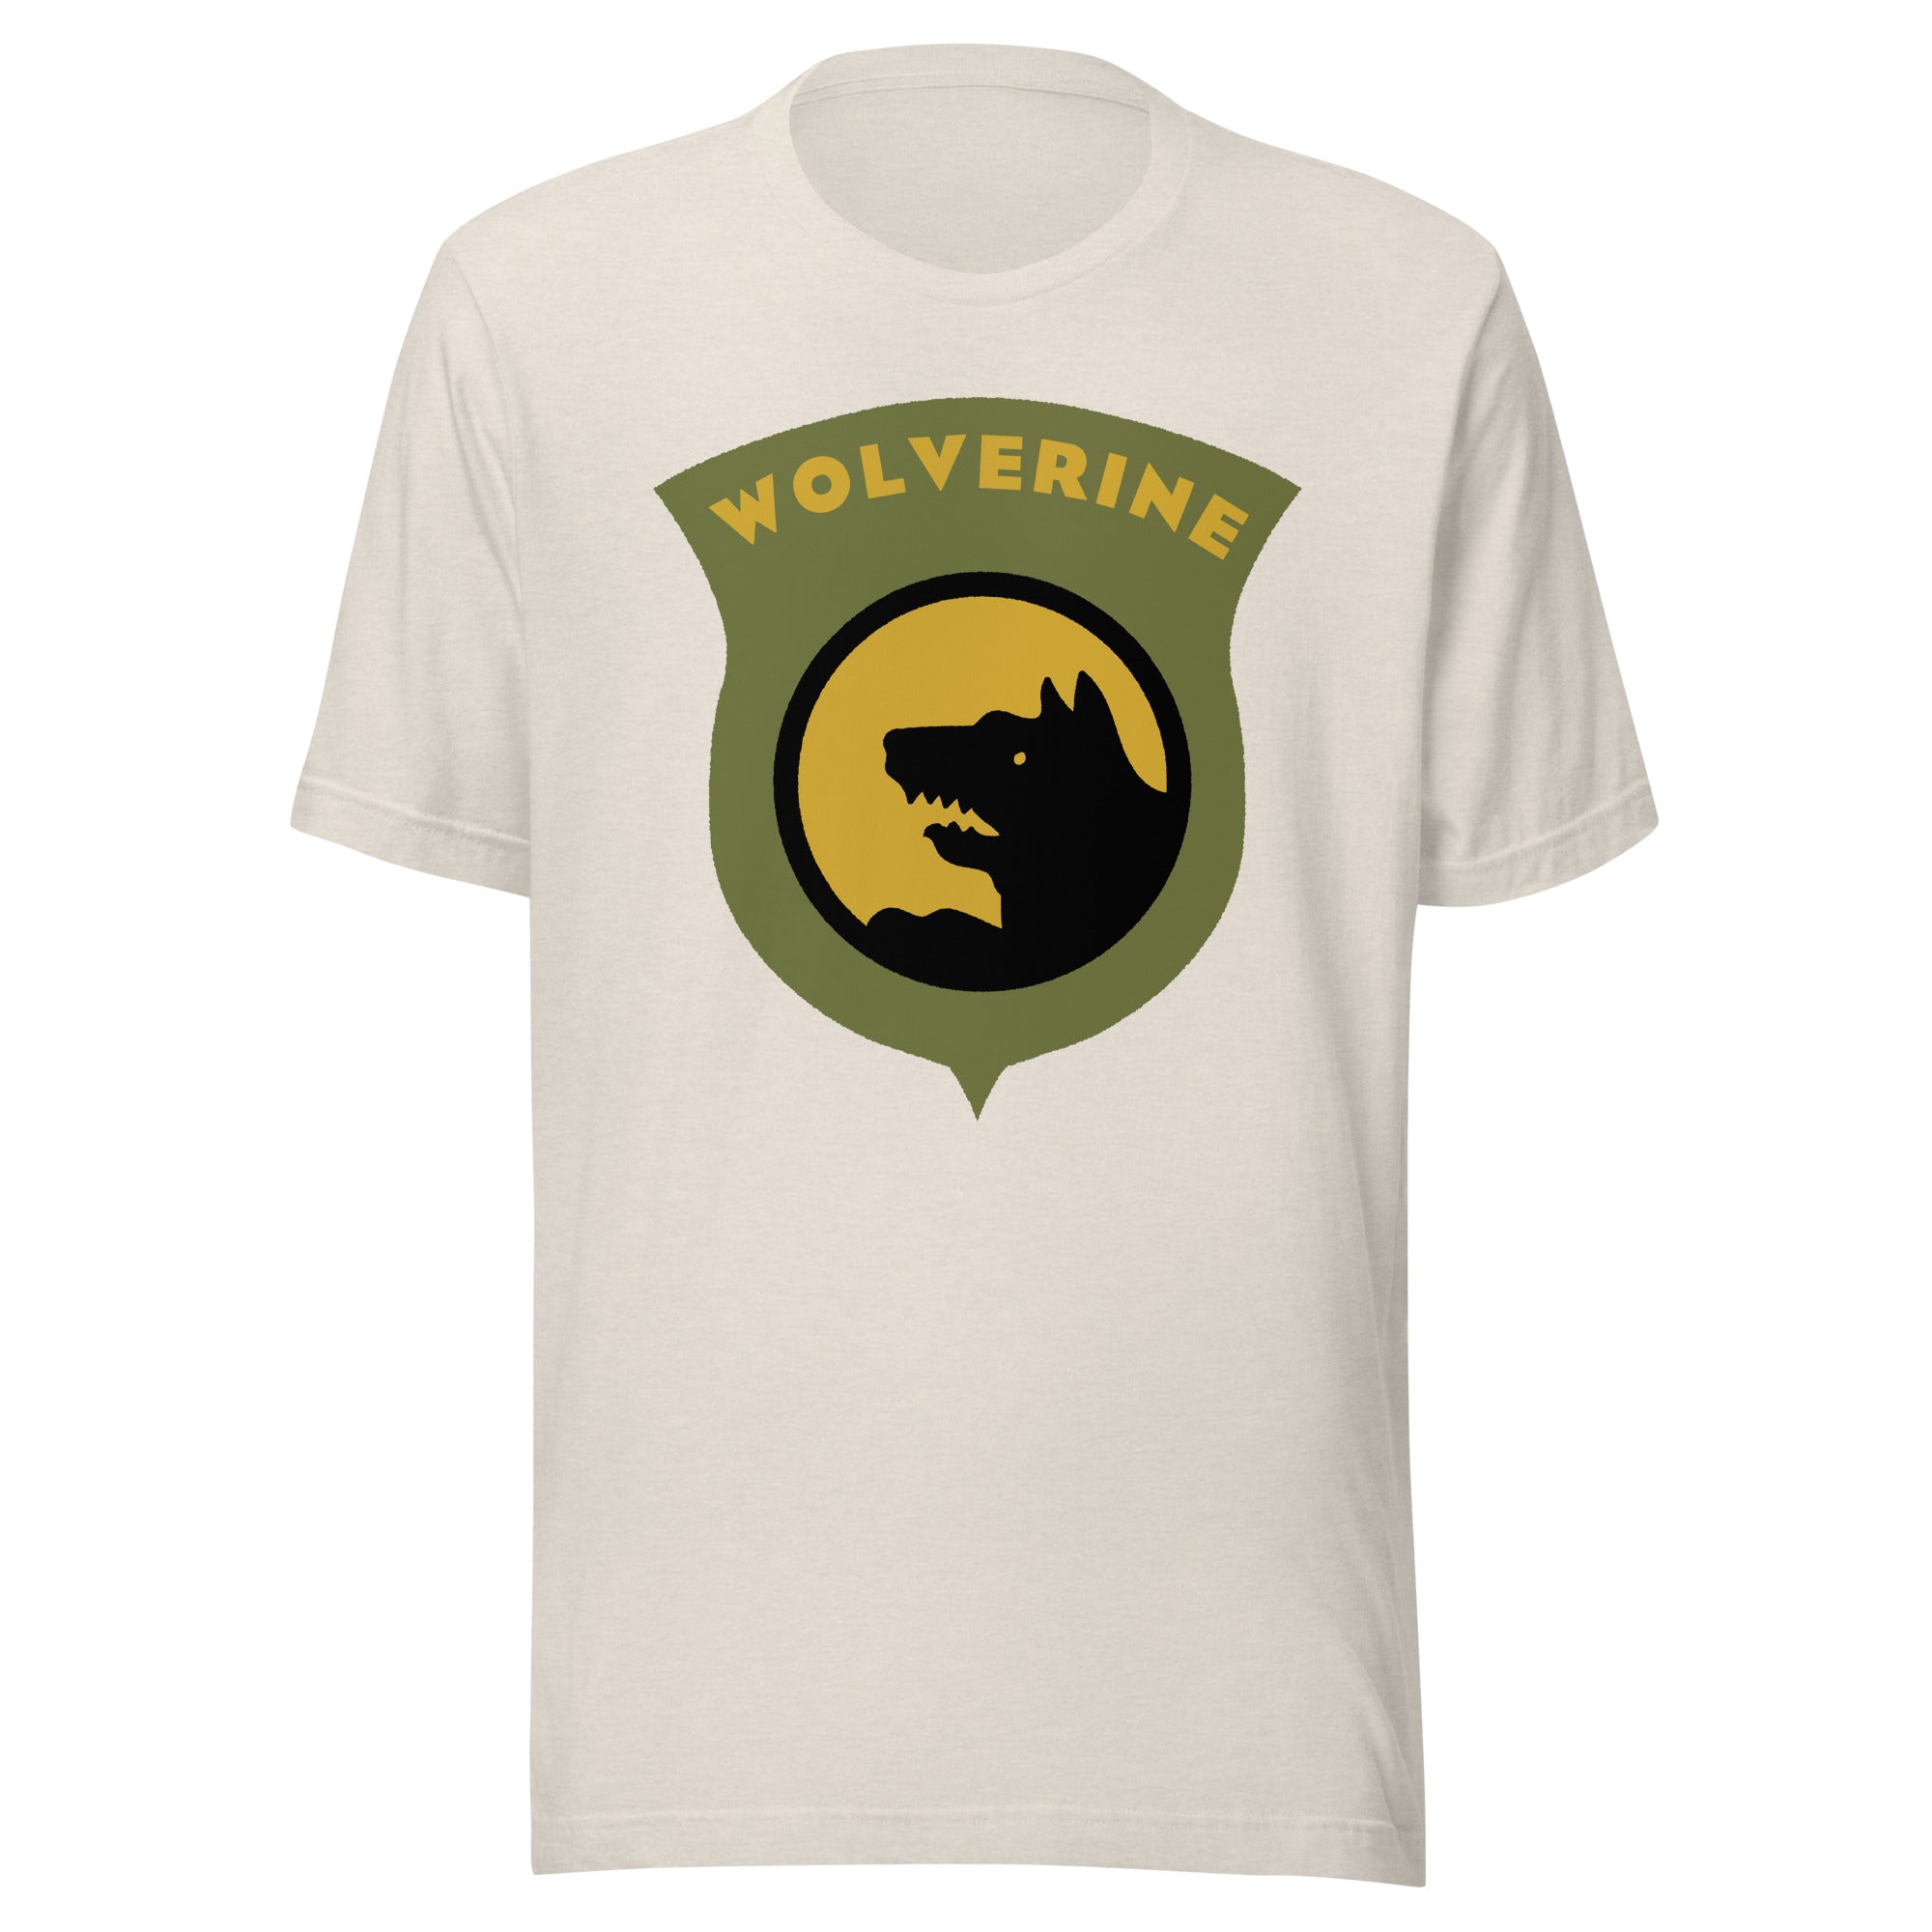 14th Wolverine Division Insignia T-Shirt